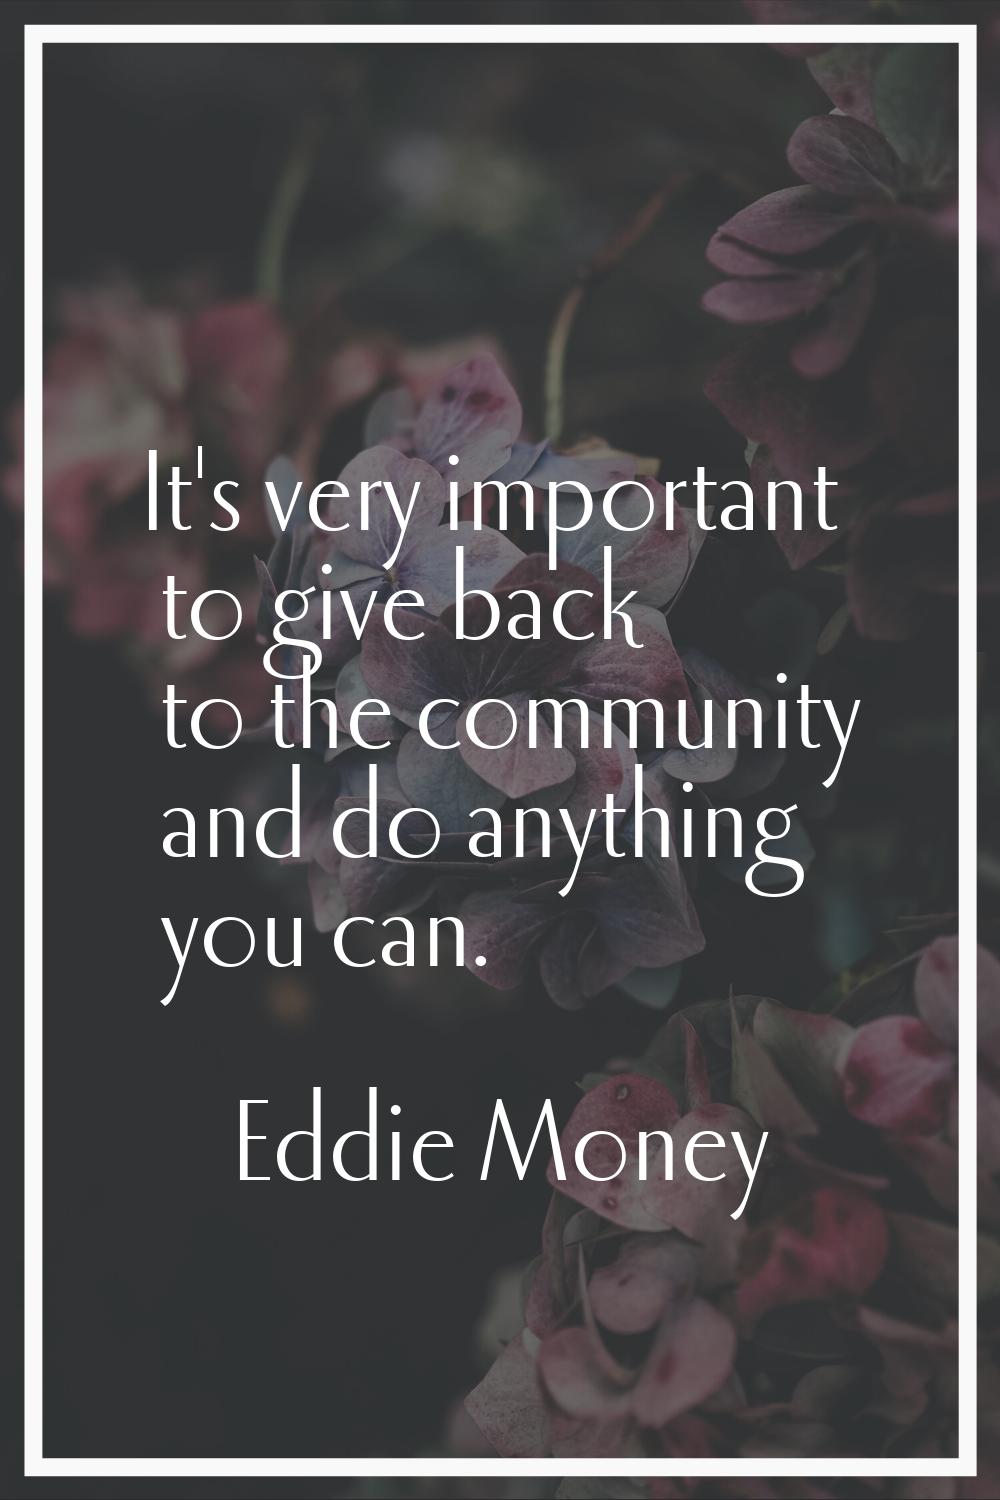 It's very important to give back to the community and do anything you can.